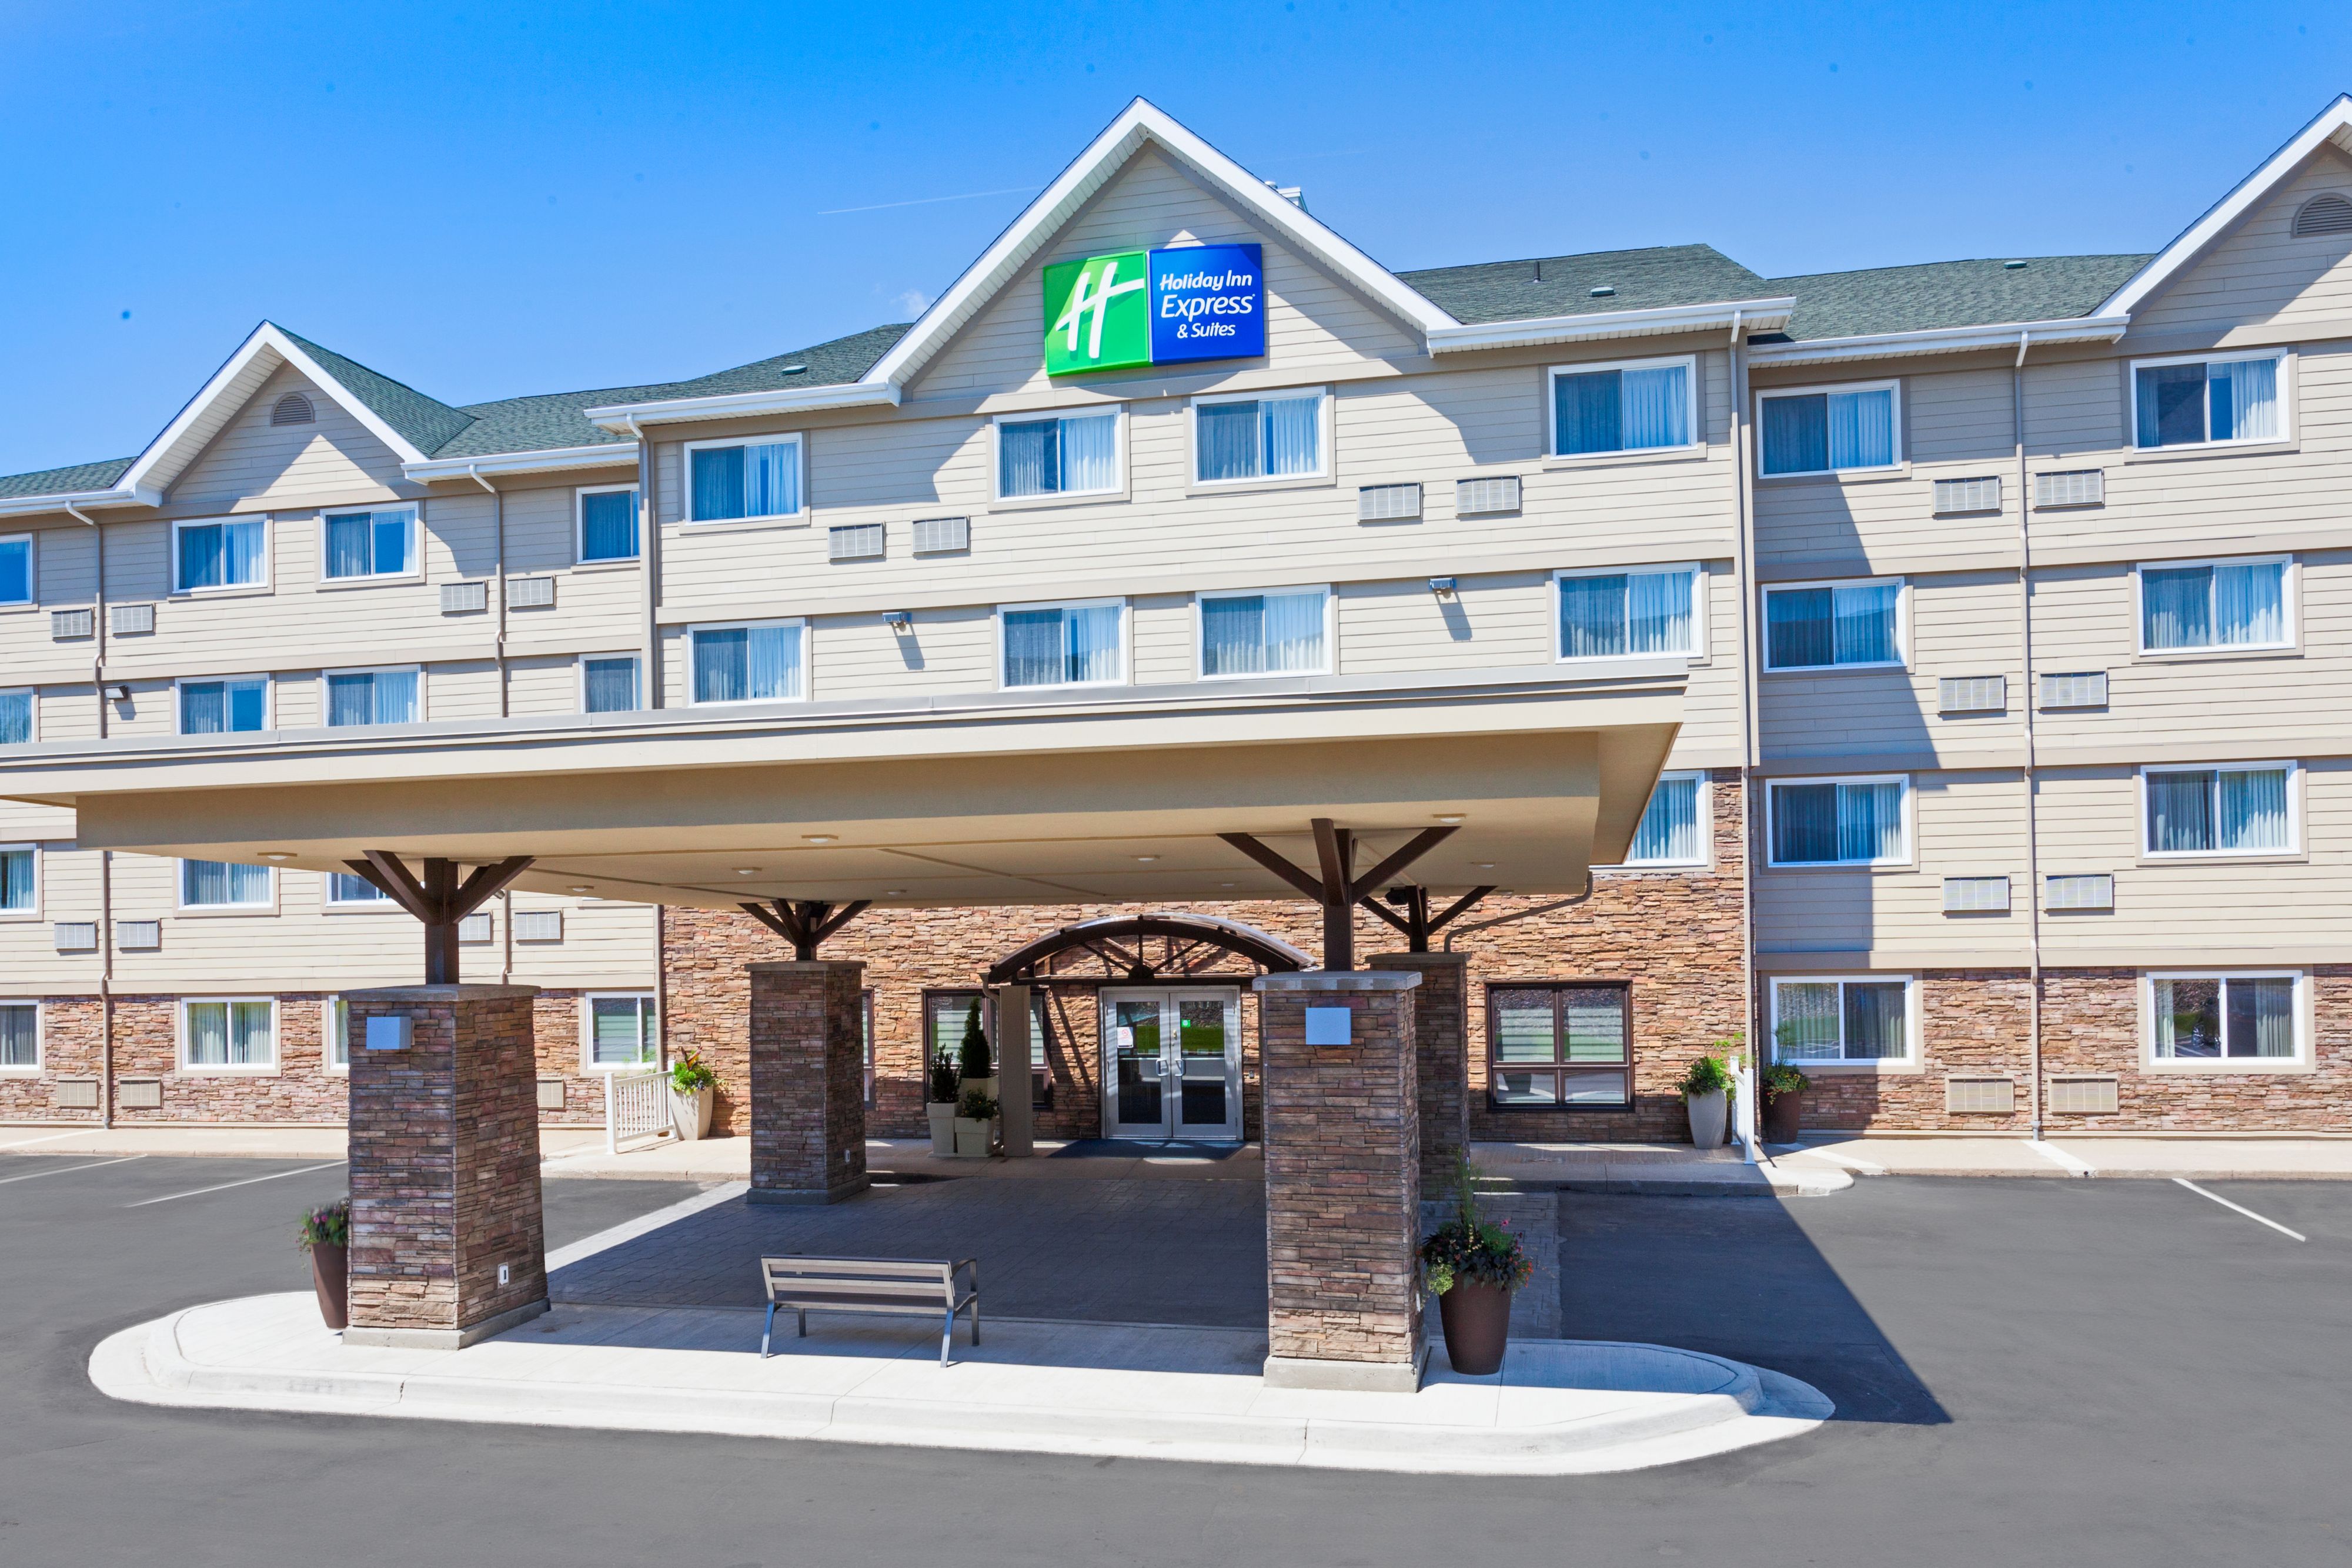 holiday-inn-express-and-suites-fredericton-4138676983-original.jpg